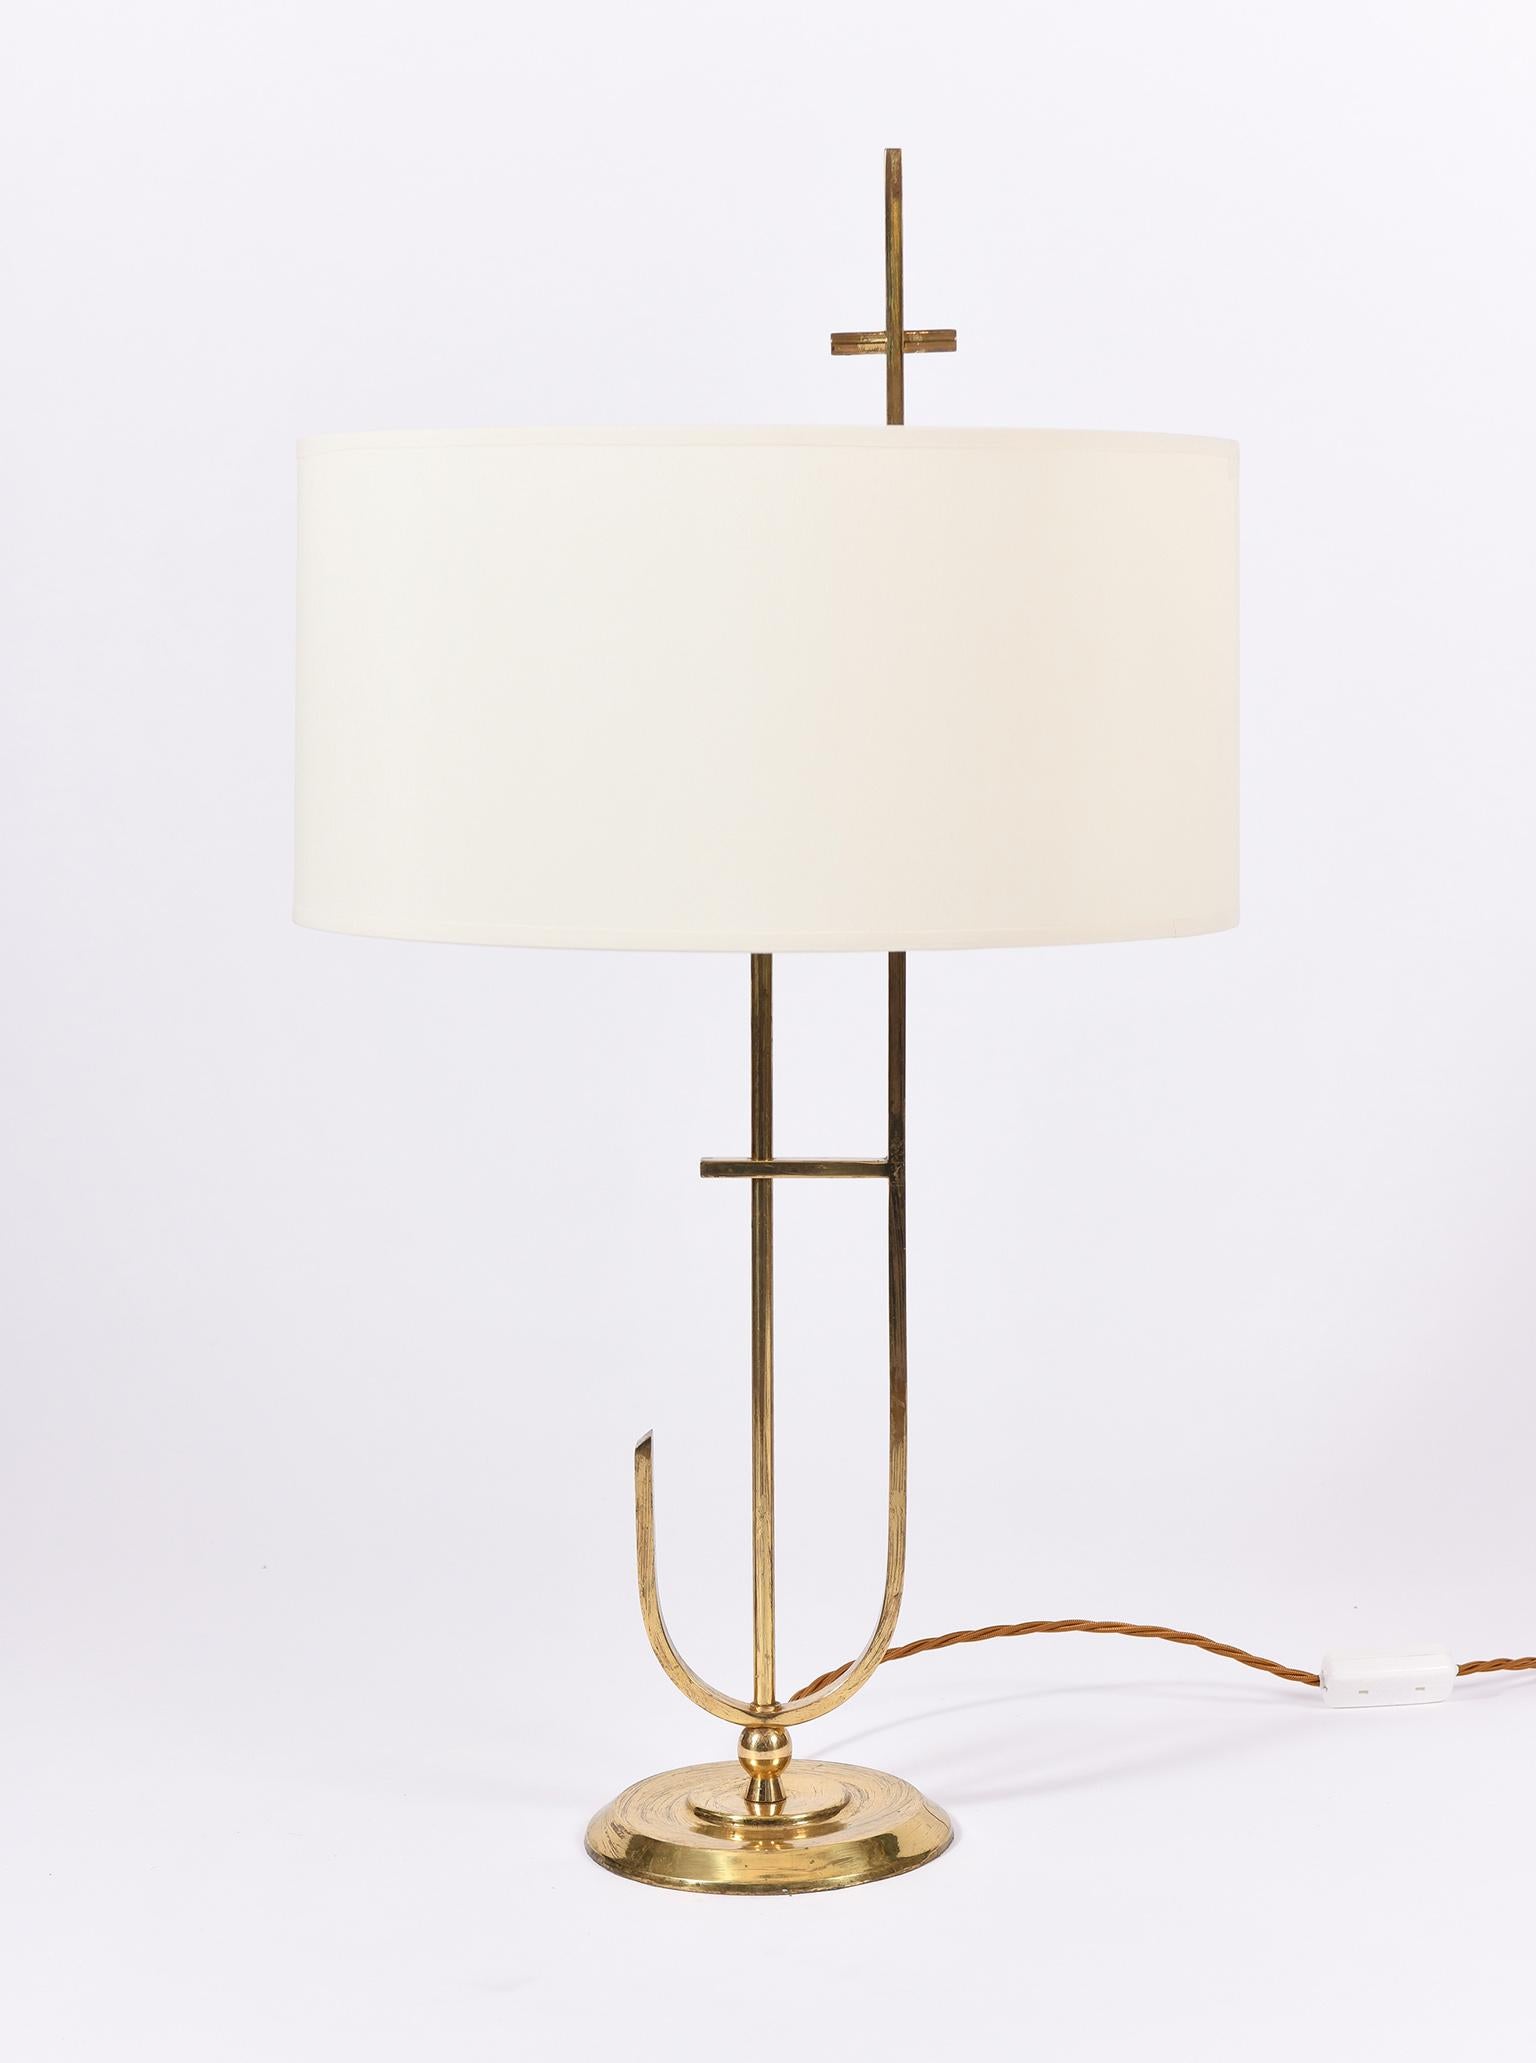 A brass table lamp, with a bespoke ivory fabric drum shade
France, circa 1970.